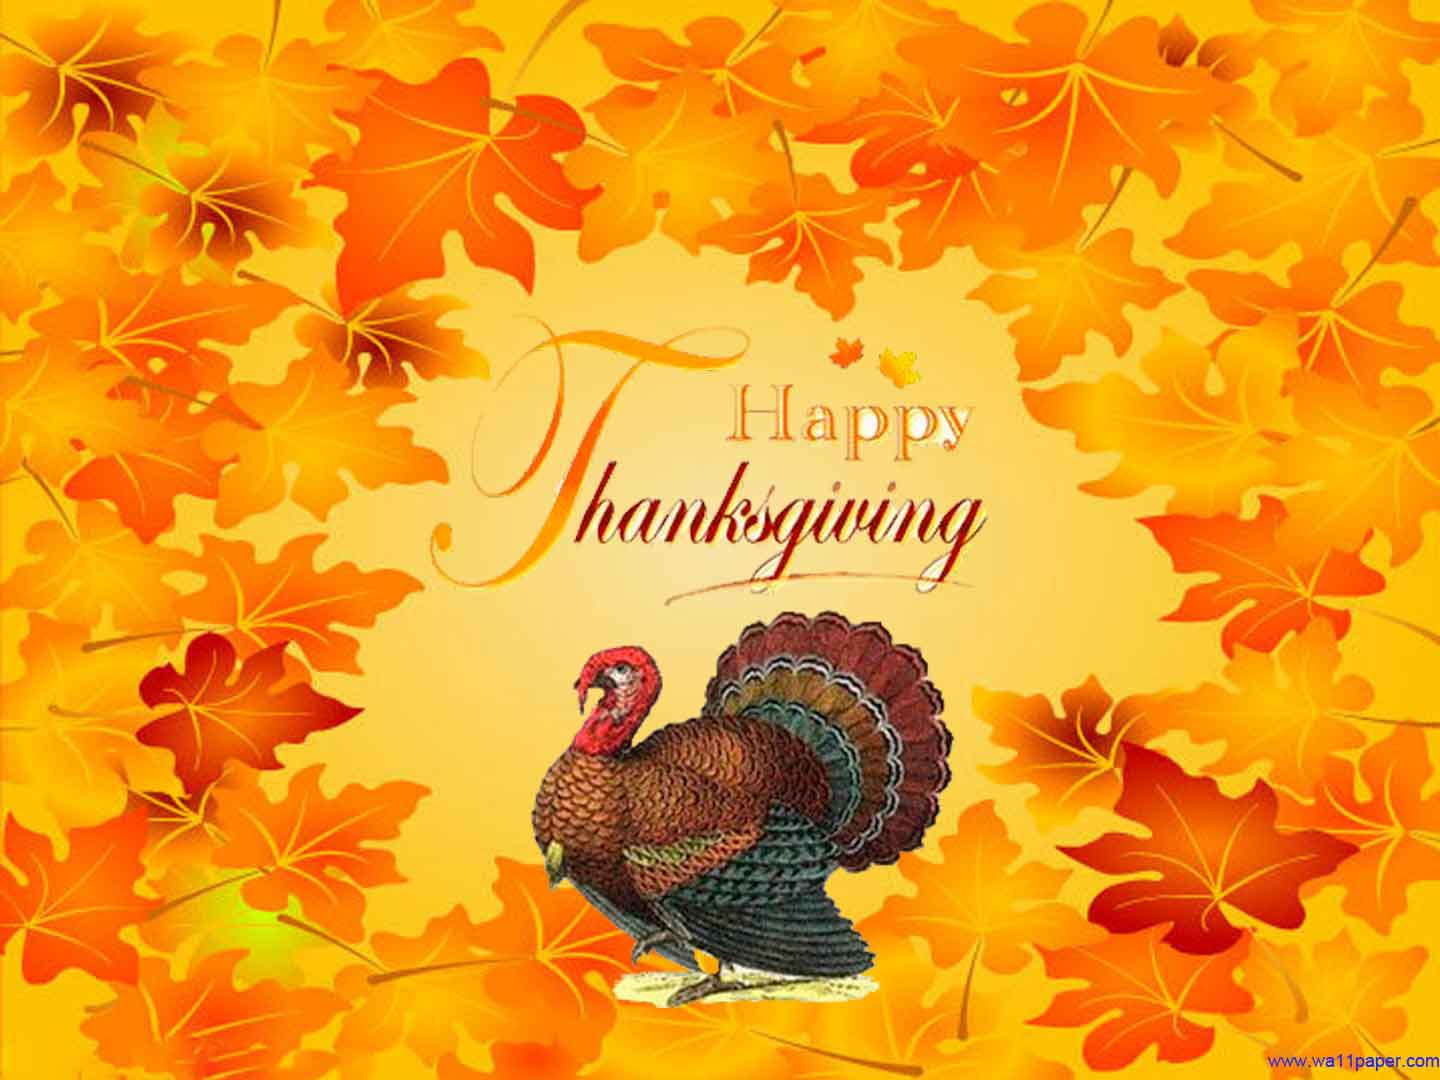 Happy Thanksgiving Turkey
 Happy Thanksgiving Wallpapers Free Wallpaper Cave